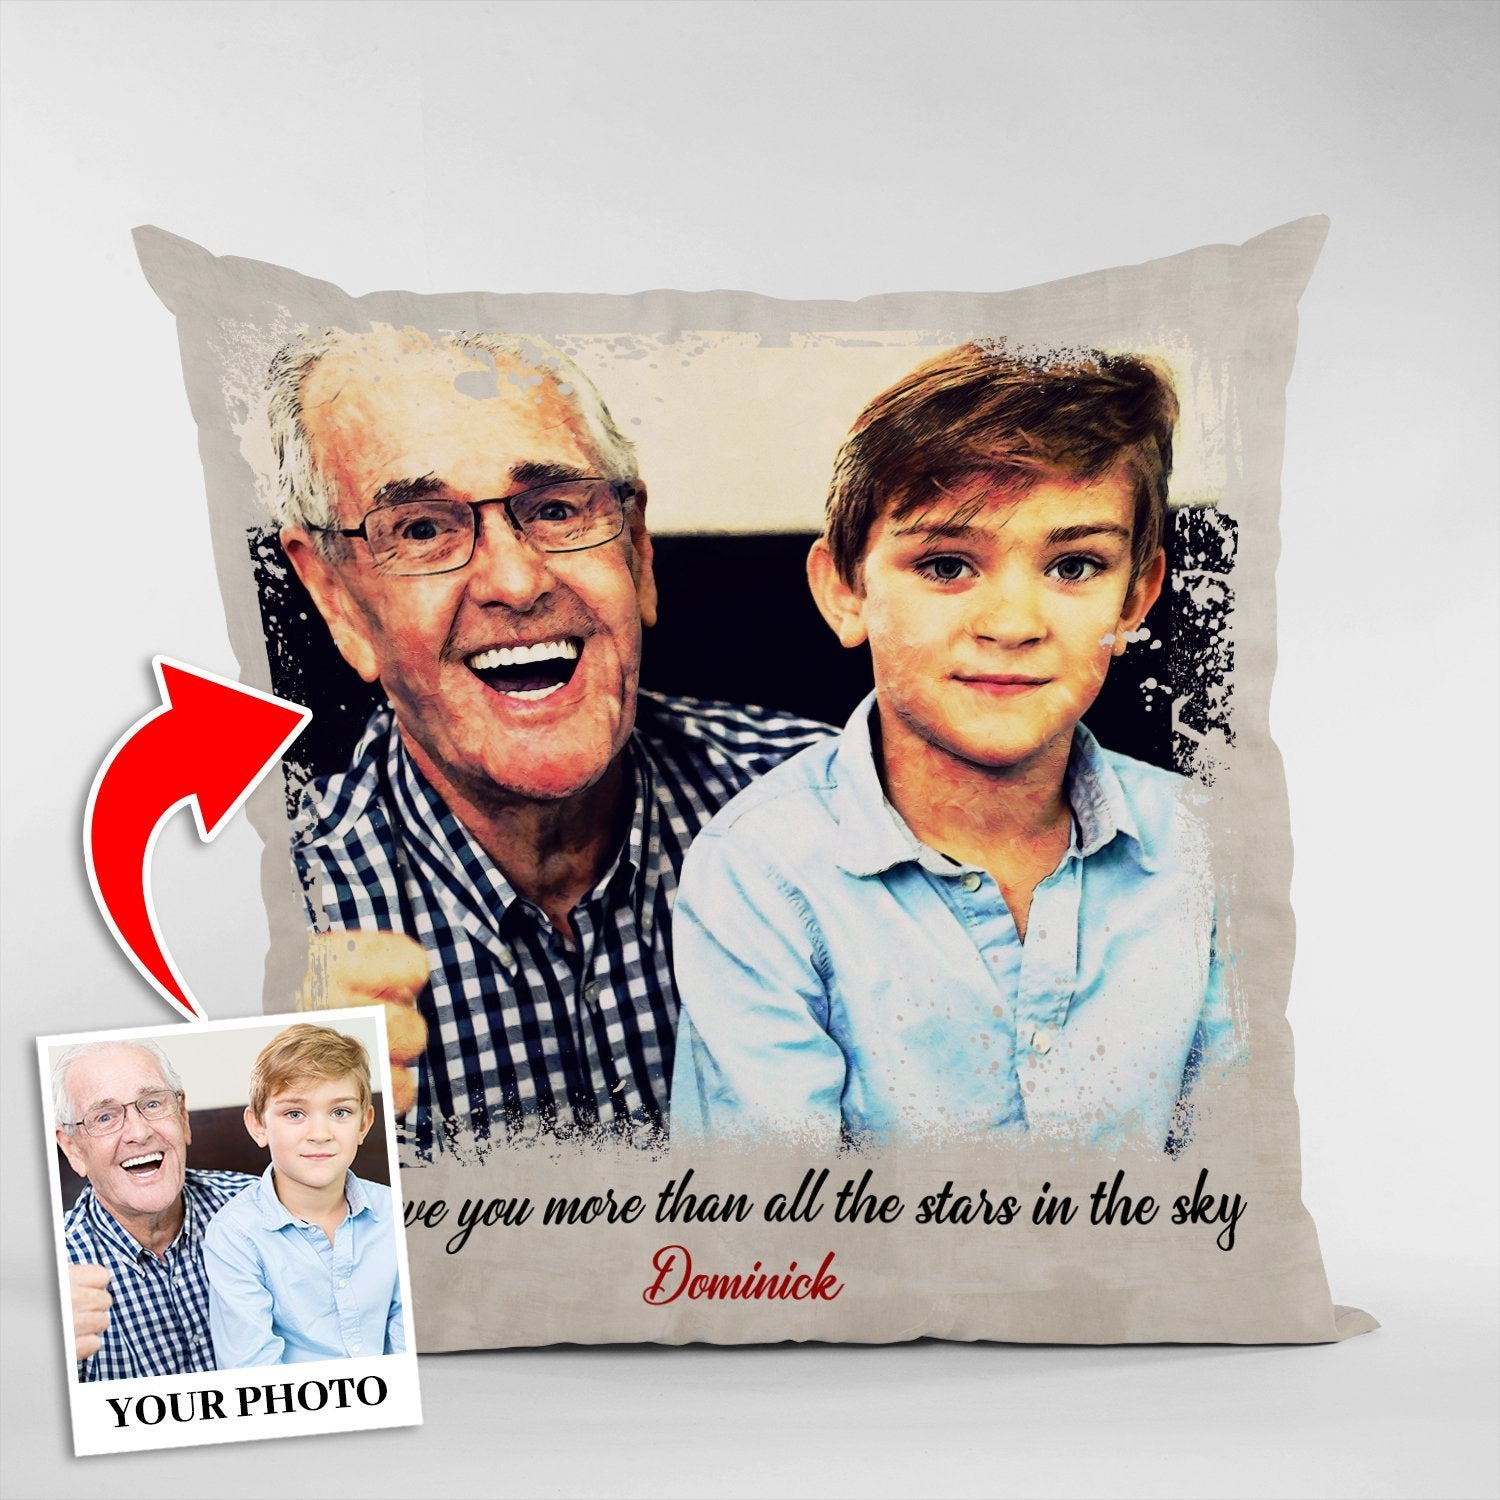 For the older grandpa, sleeping well is very important to his health. So, why not show your care to him with a pillow created on your own? This unique and soft photo pillow will help him to be more comfortable, get good sleep, and stay healthy to get through a long life.